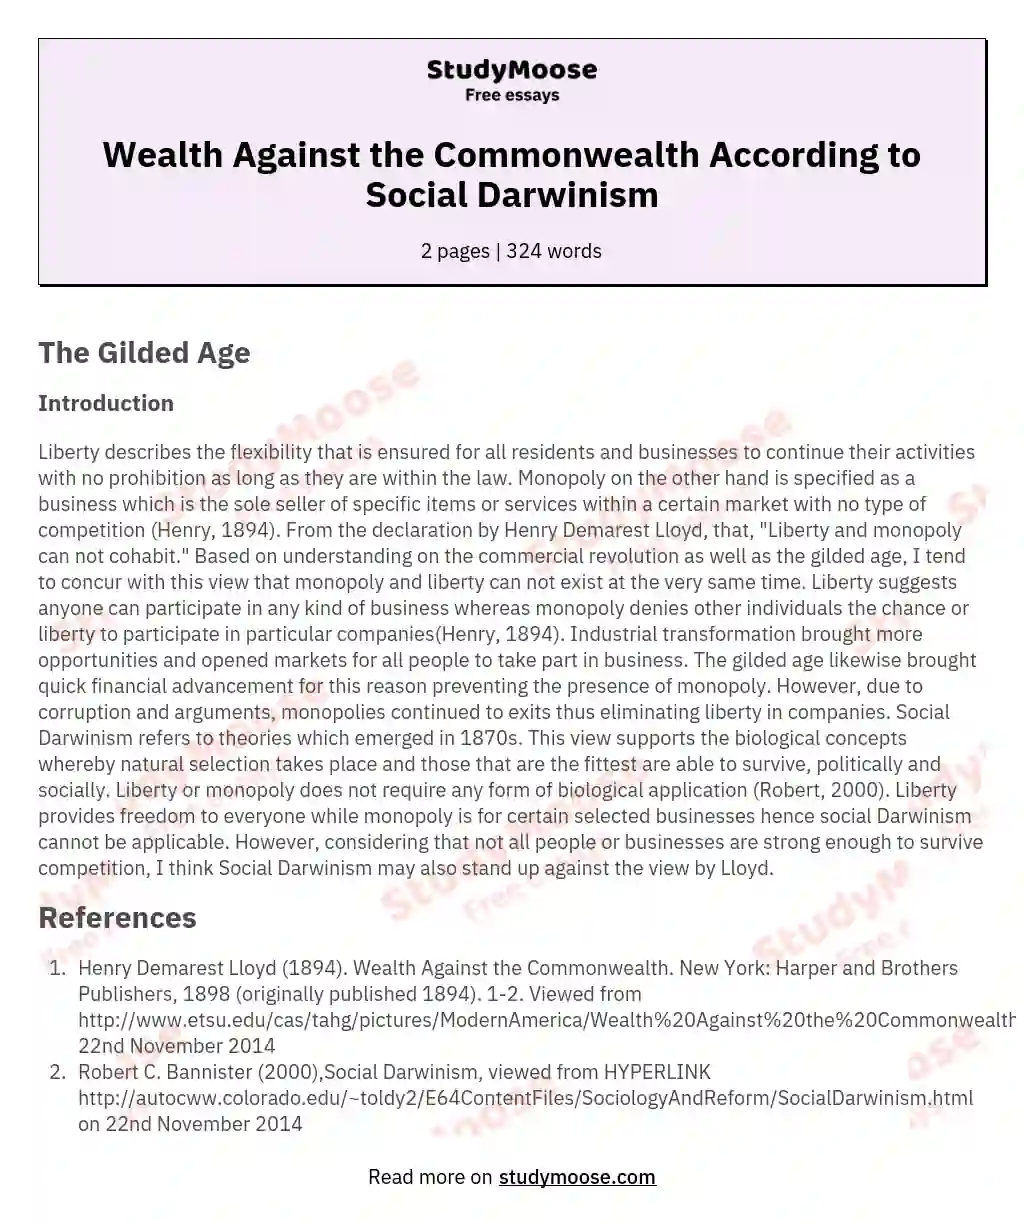 Wealth Against the Commonwealth According to Social Darwinism